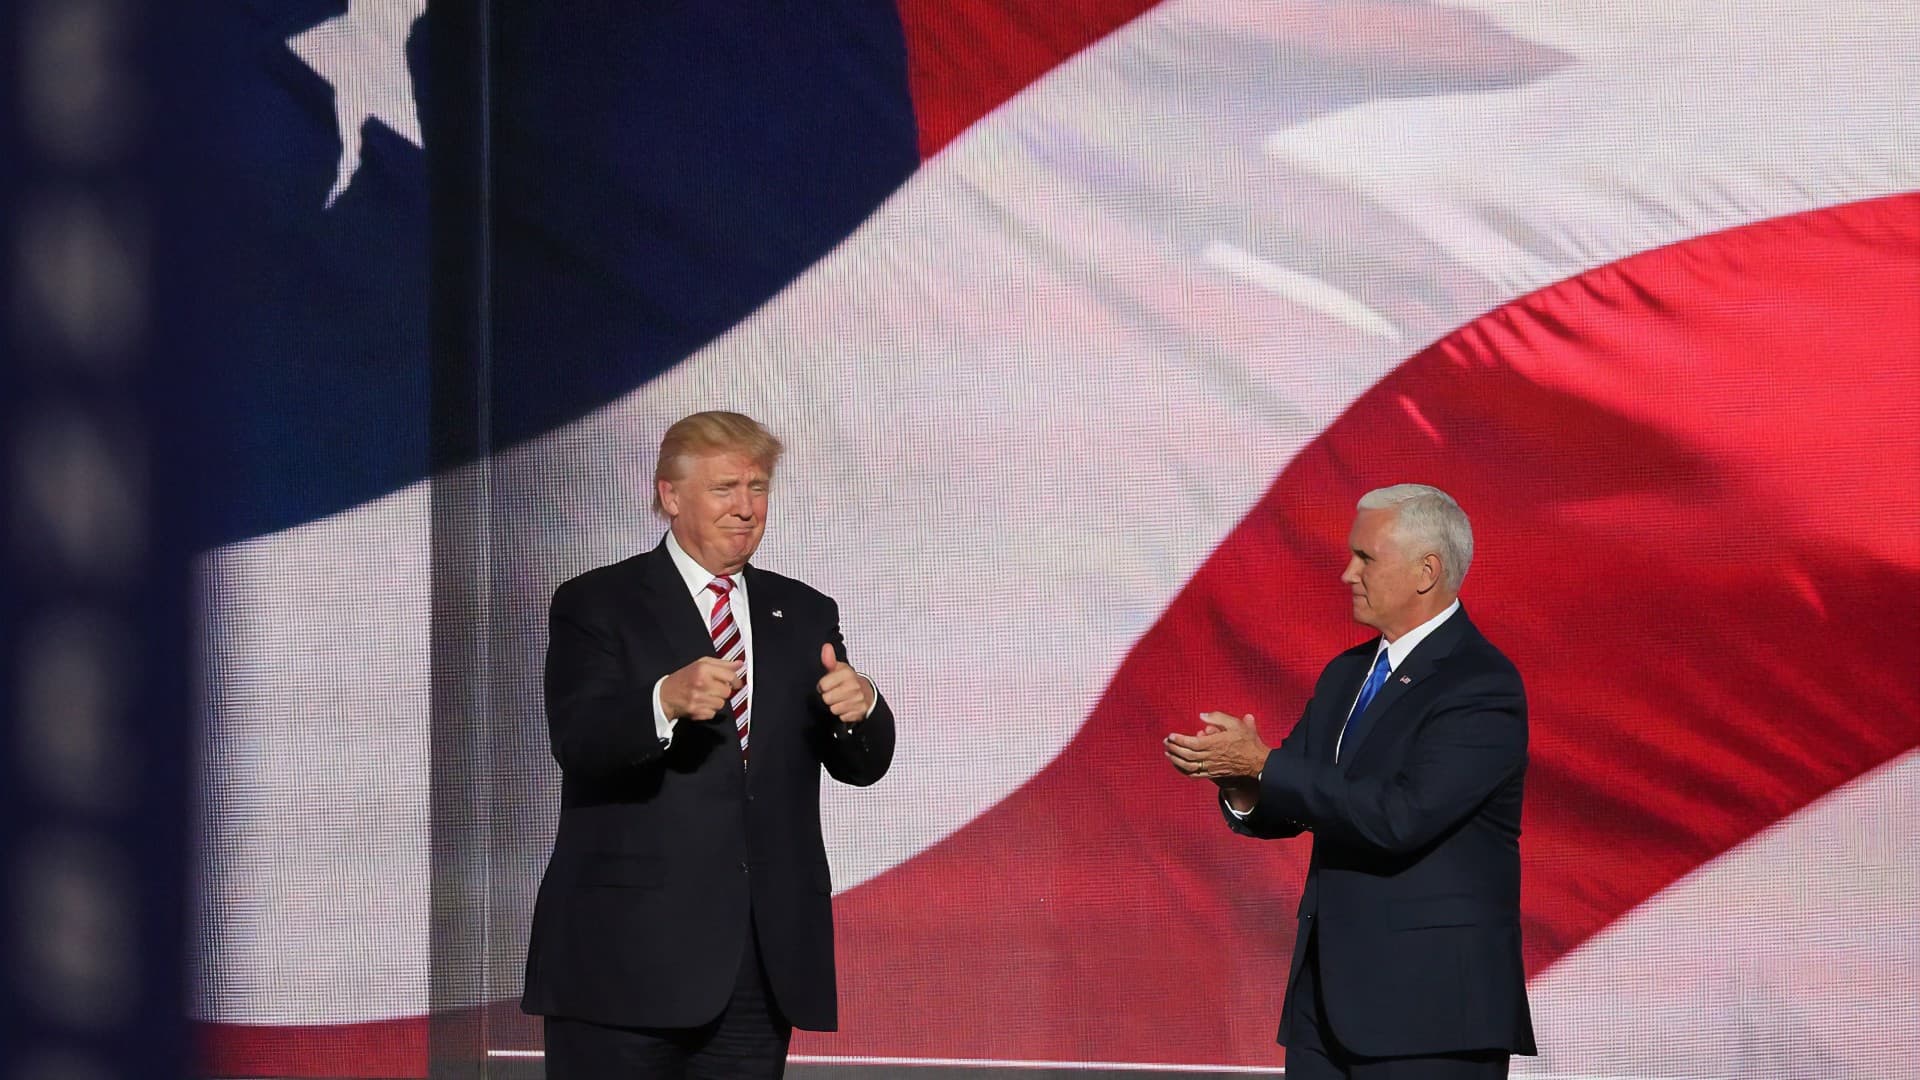 An image of President Donald Trump on stage, against an American flag, with Vice President Mike Pence. Photo: Unpslash